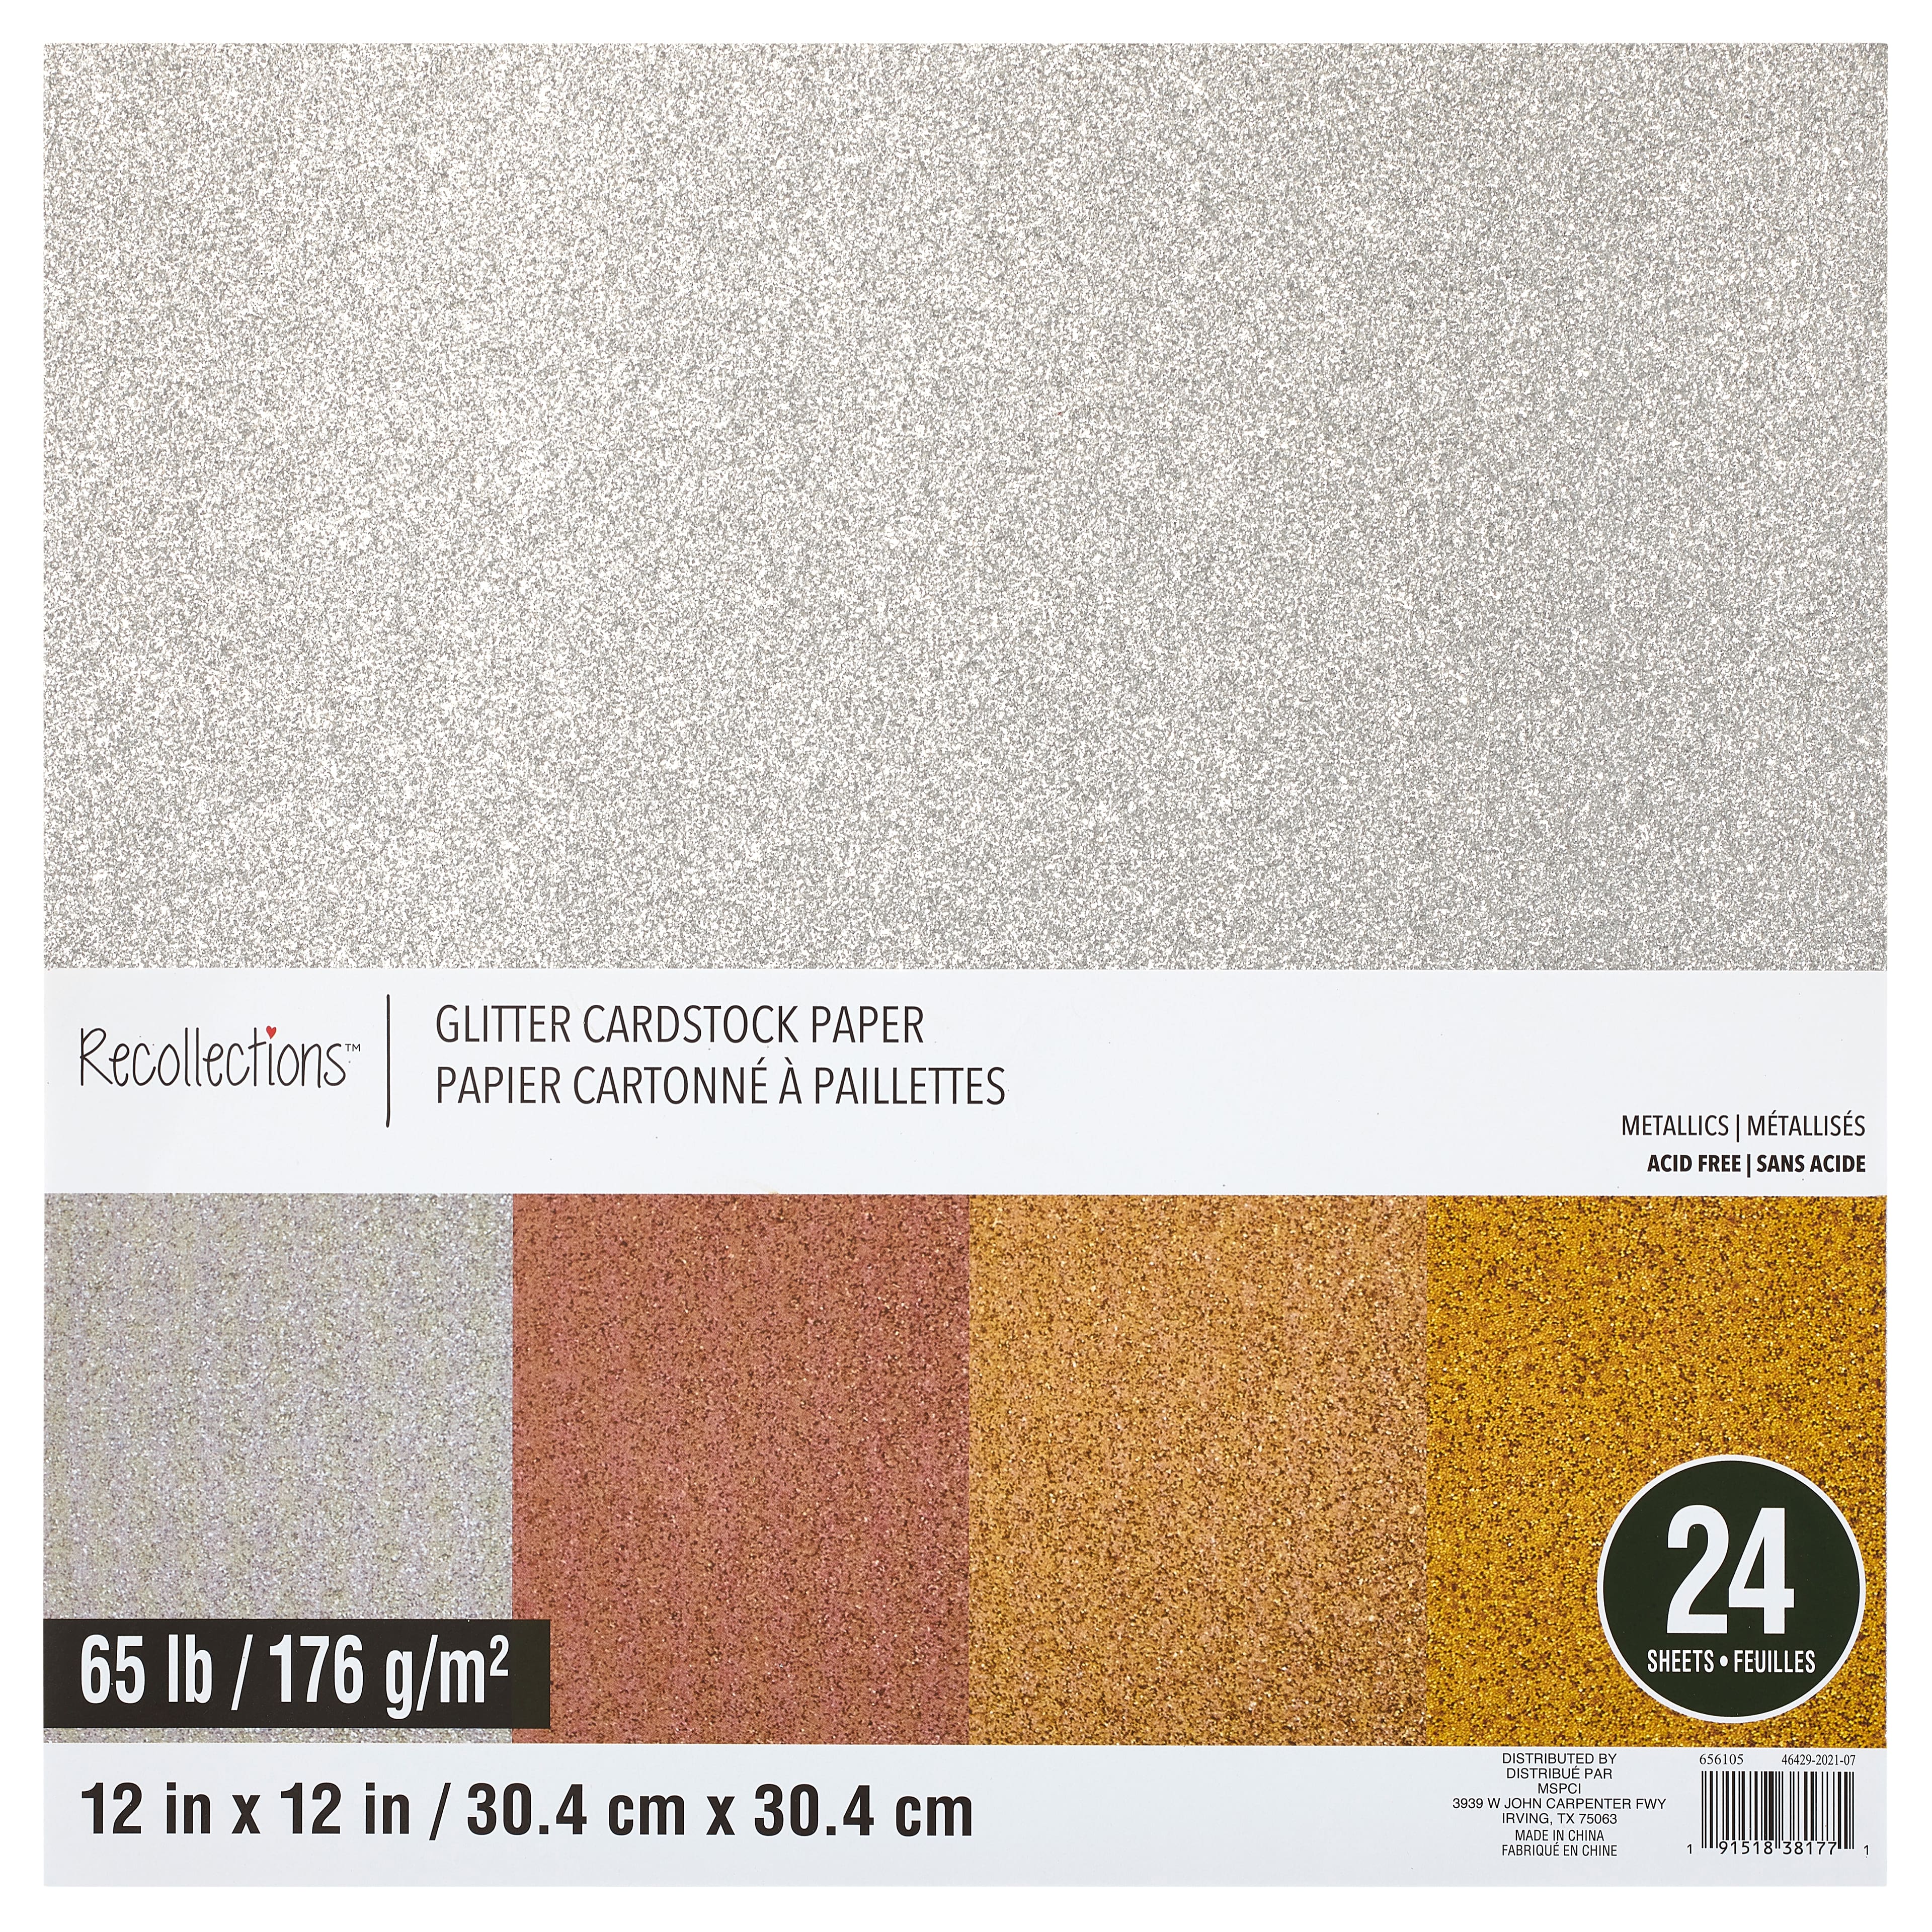 Confetti Glitter Paper by Recollections 12 x 12 | Michaels